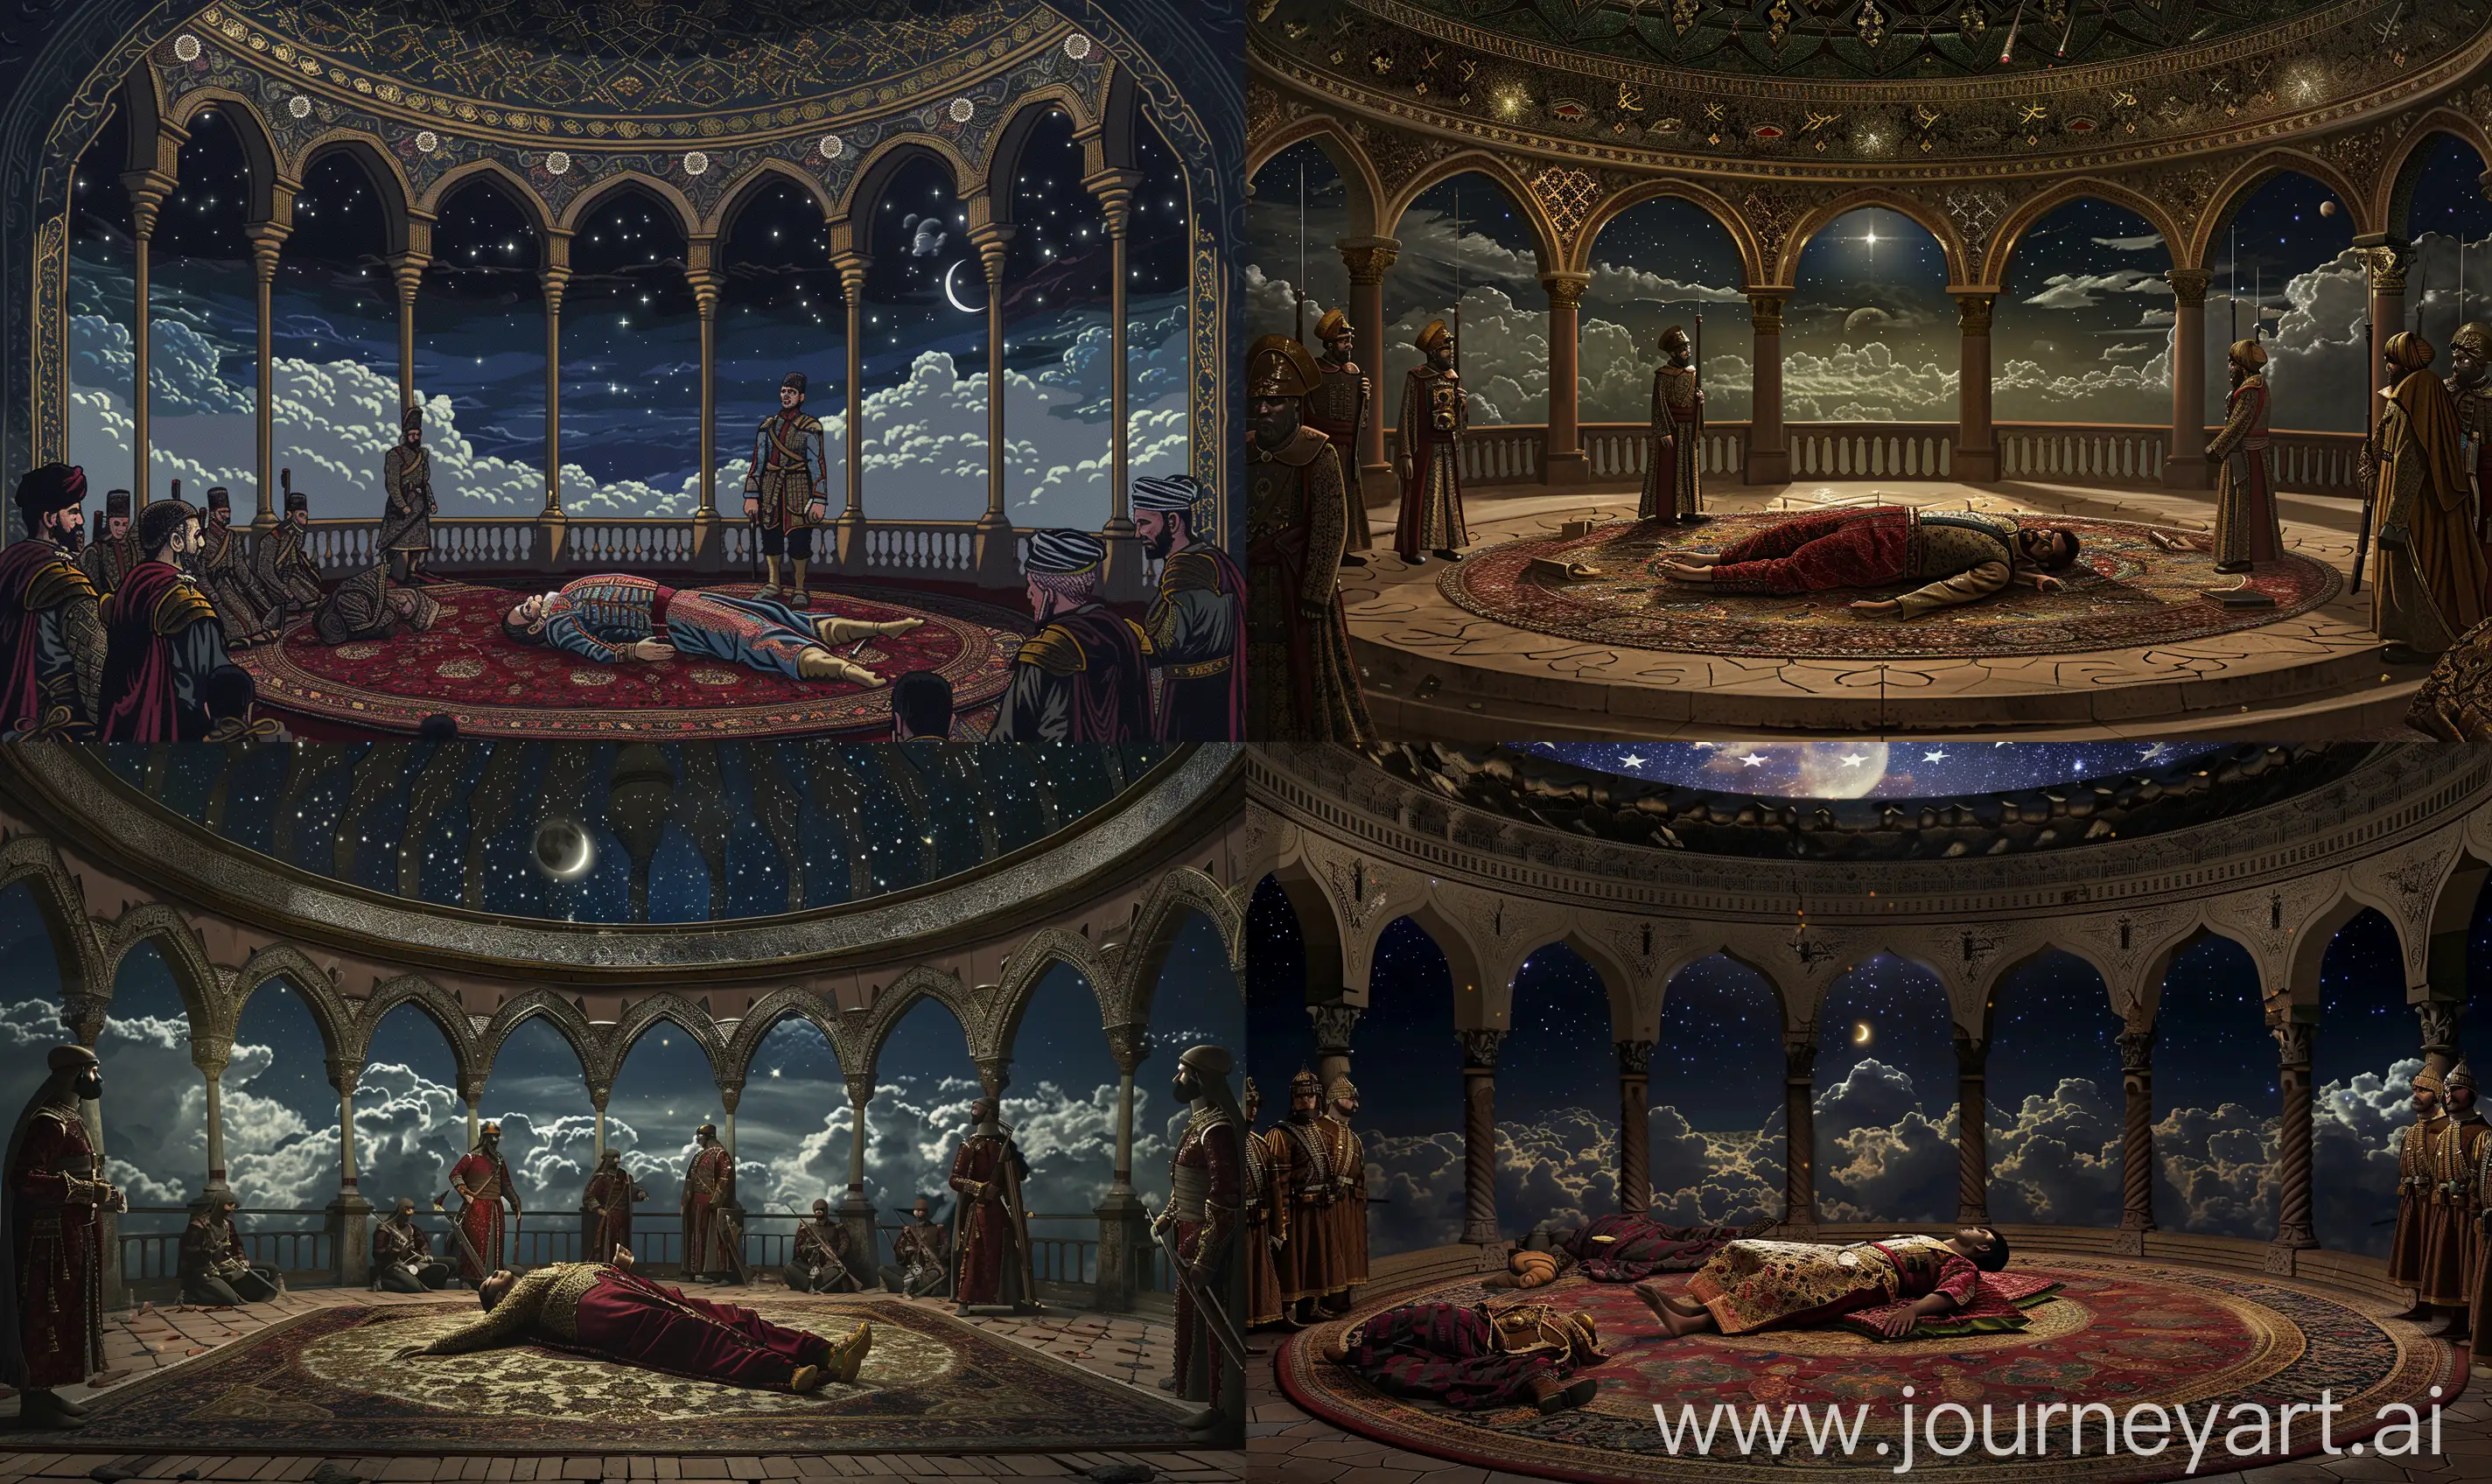 inside of a round isolated hall covered with islamic ceiling, having islamic arched windows around, islamic style baluster at border, a dead prince lying on the persian carpet surrounded by ottoman guards wearing janissary uniform, view of night clouds with star and a moon visible from windows --ar 25:15